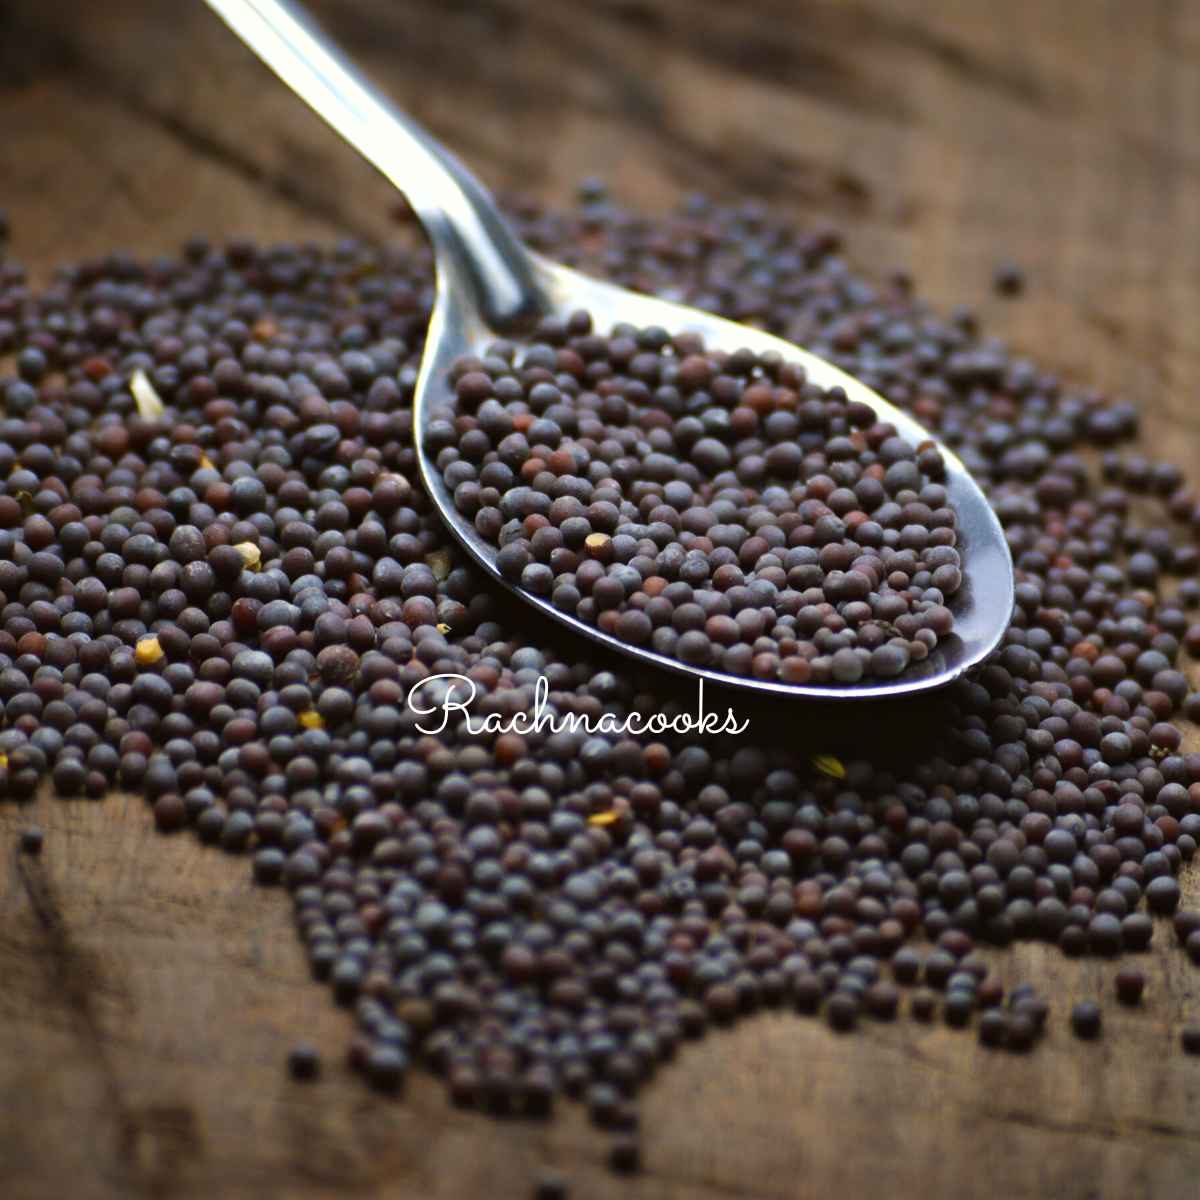 Black mustard seeds in a spoon with some scattered on a frame.